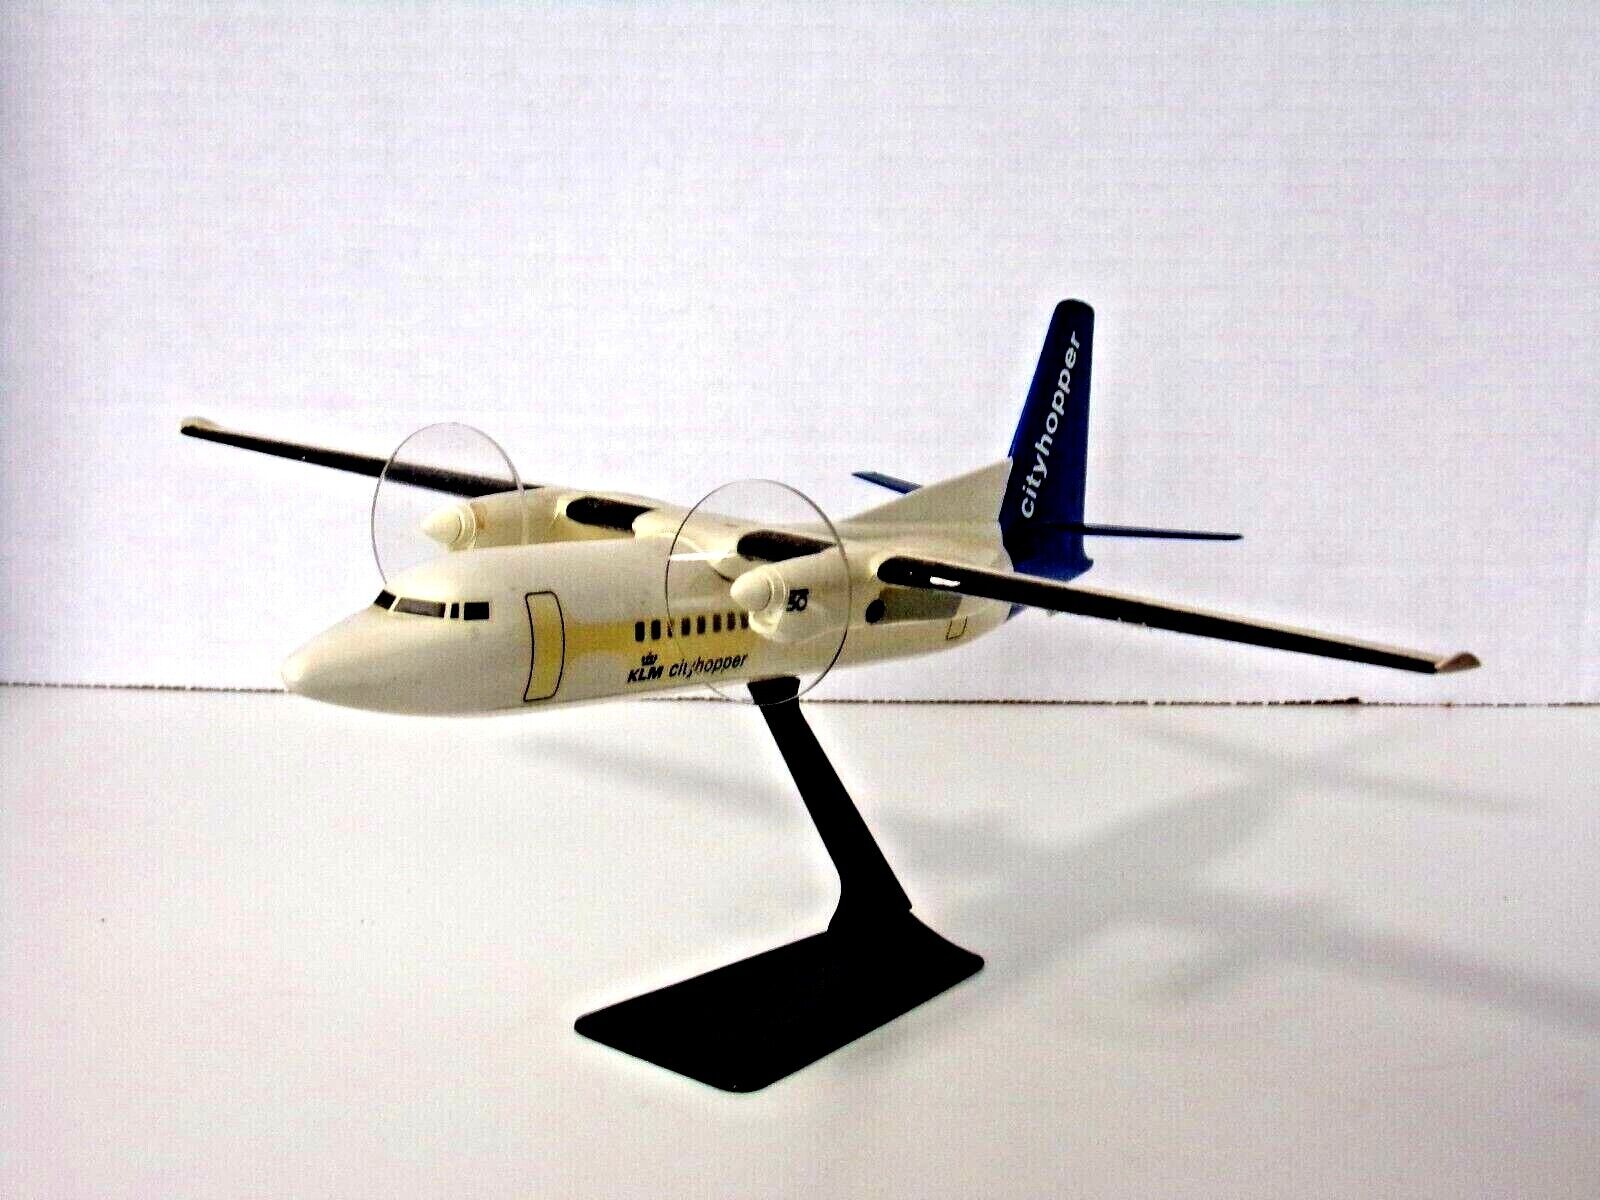 KLM Cityhopper Fokker 50 Airplane Model with stand, scale 1/100